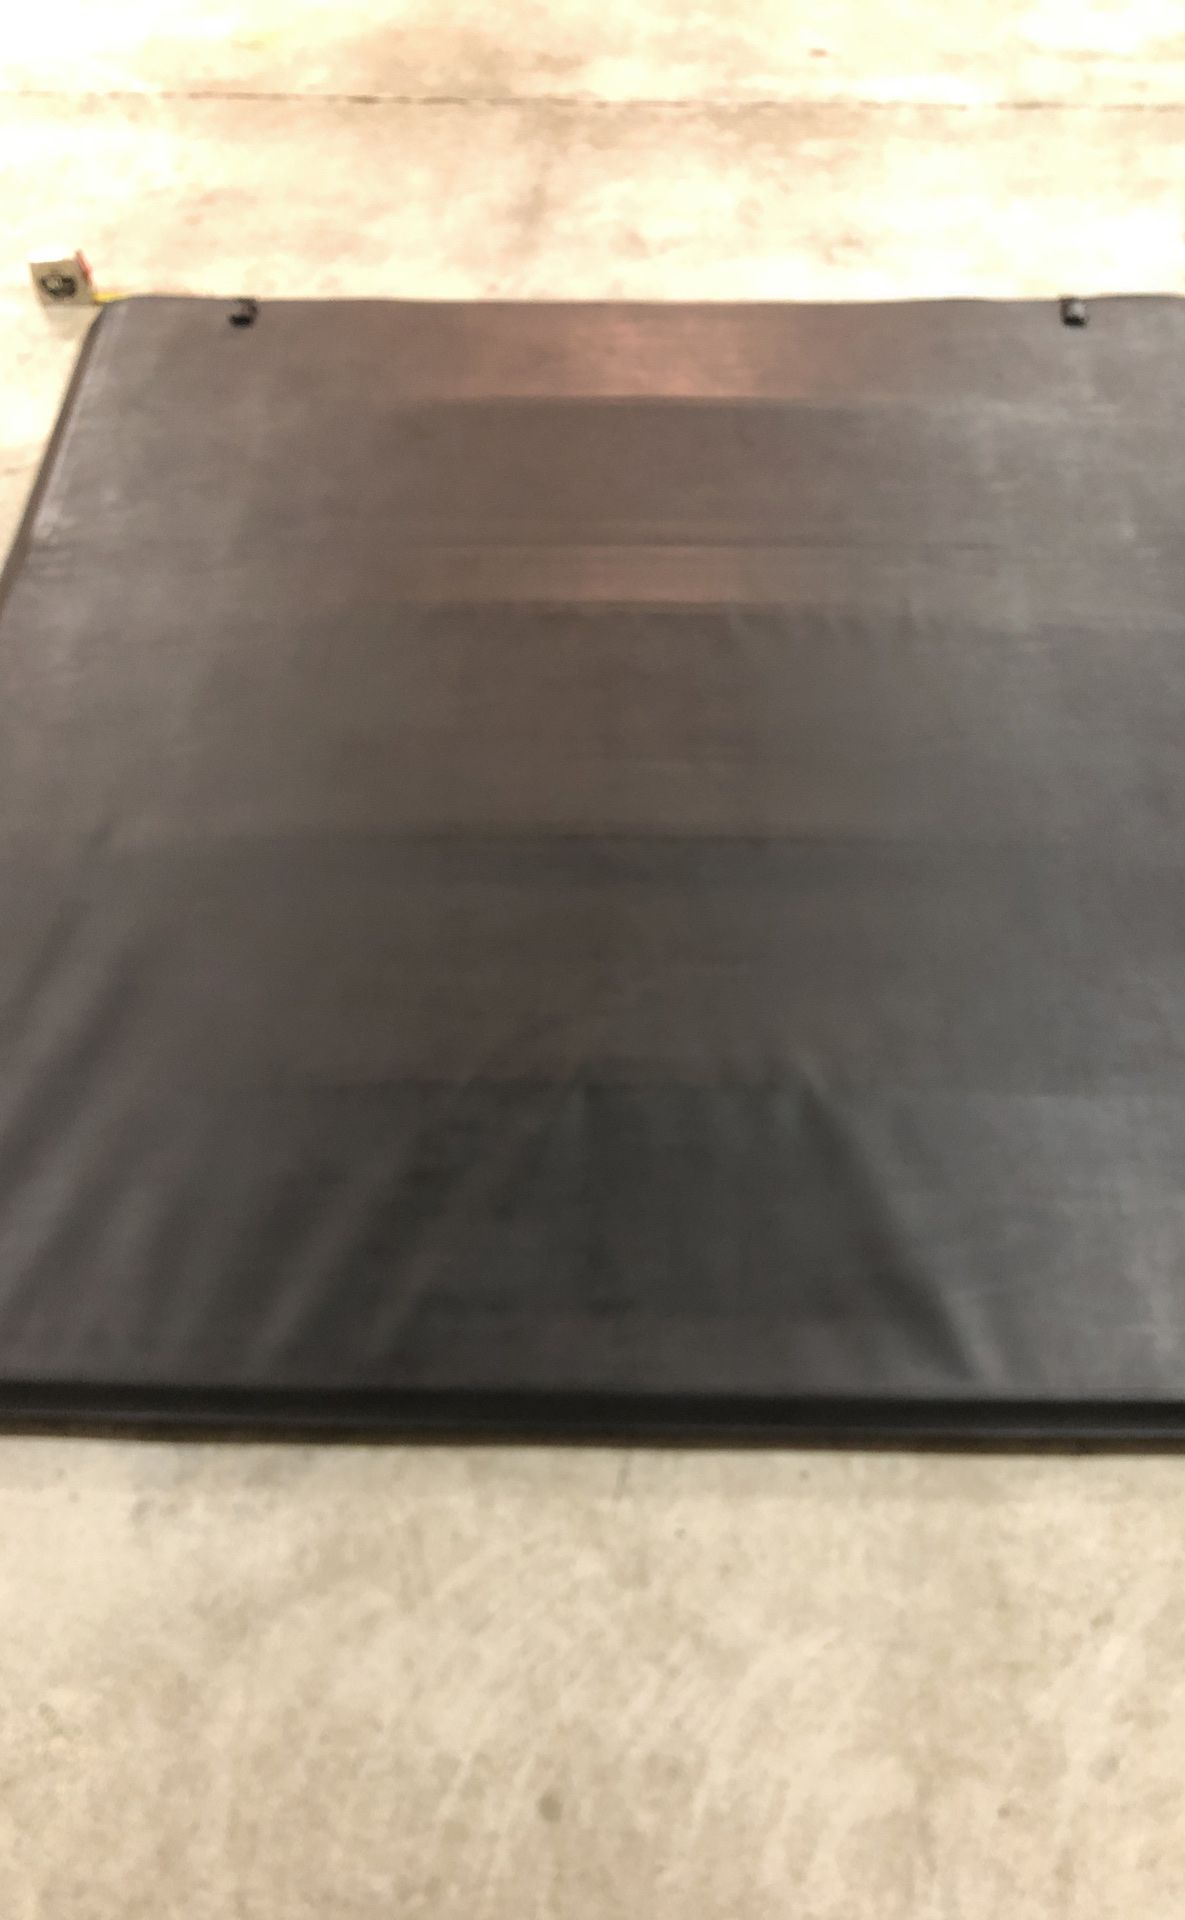 Toyota Tundra bed cover 68”X67” excellent condition